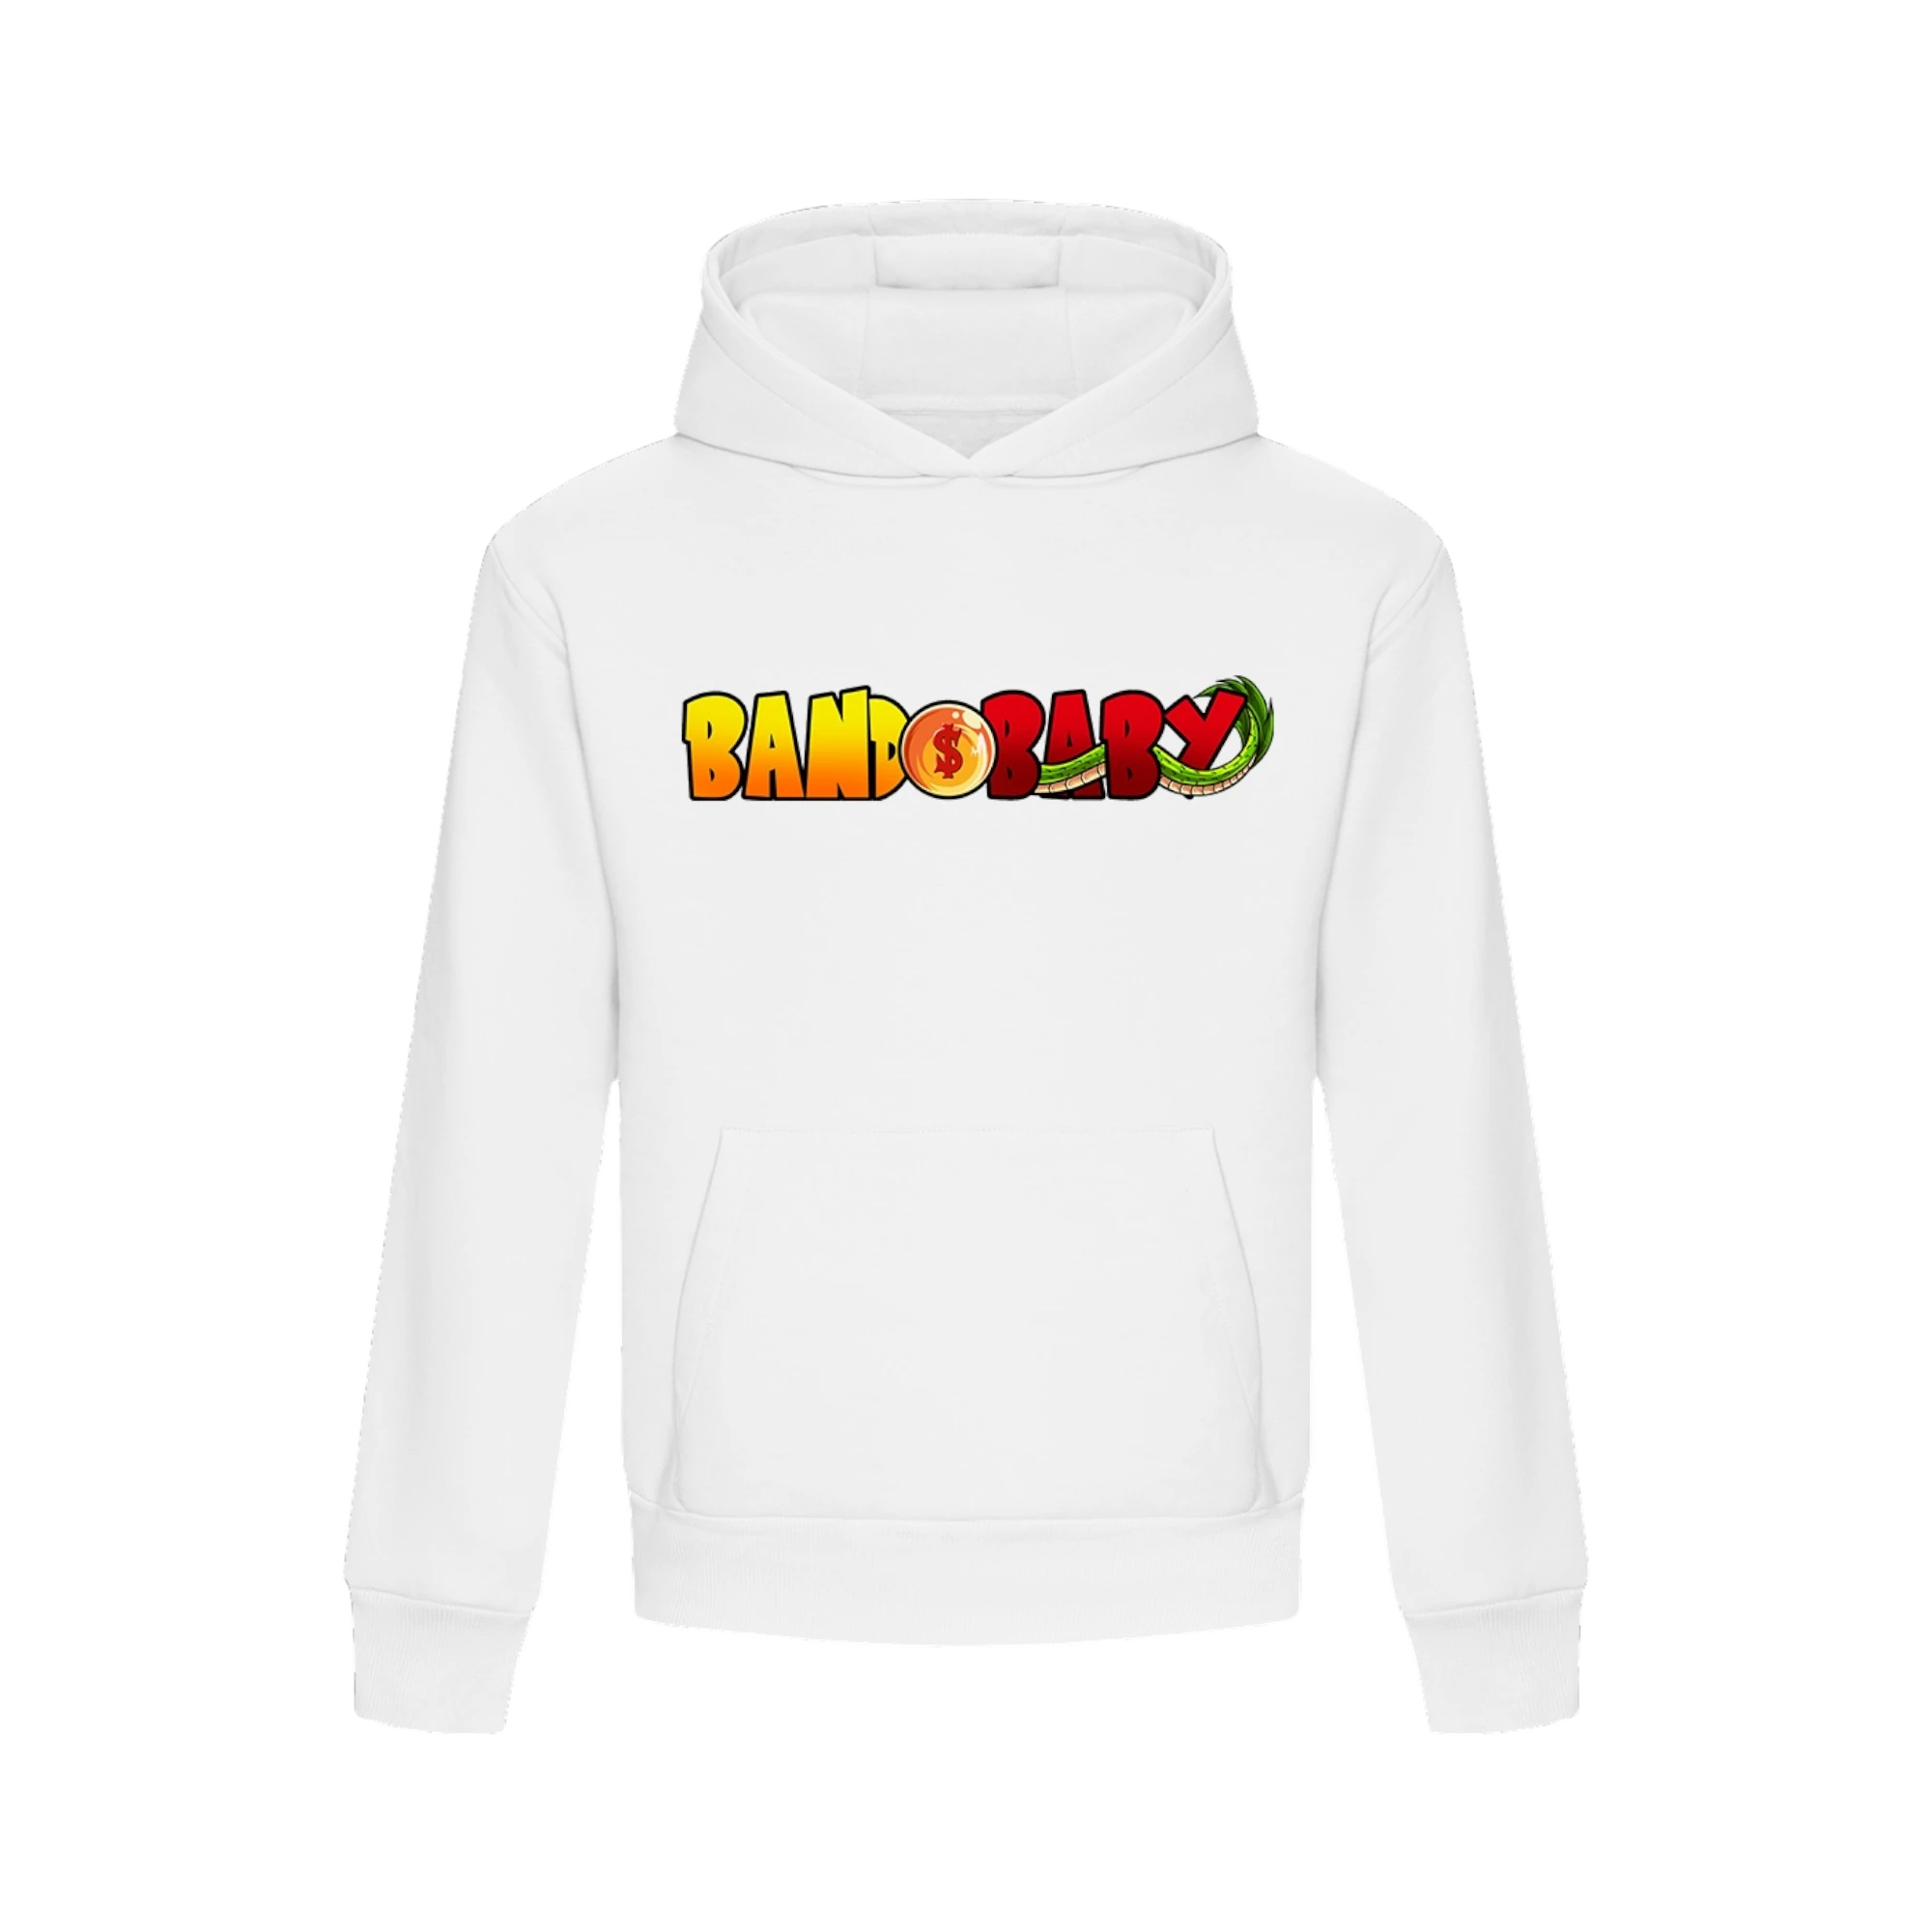 Bando baby wish for it hoodie